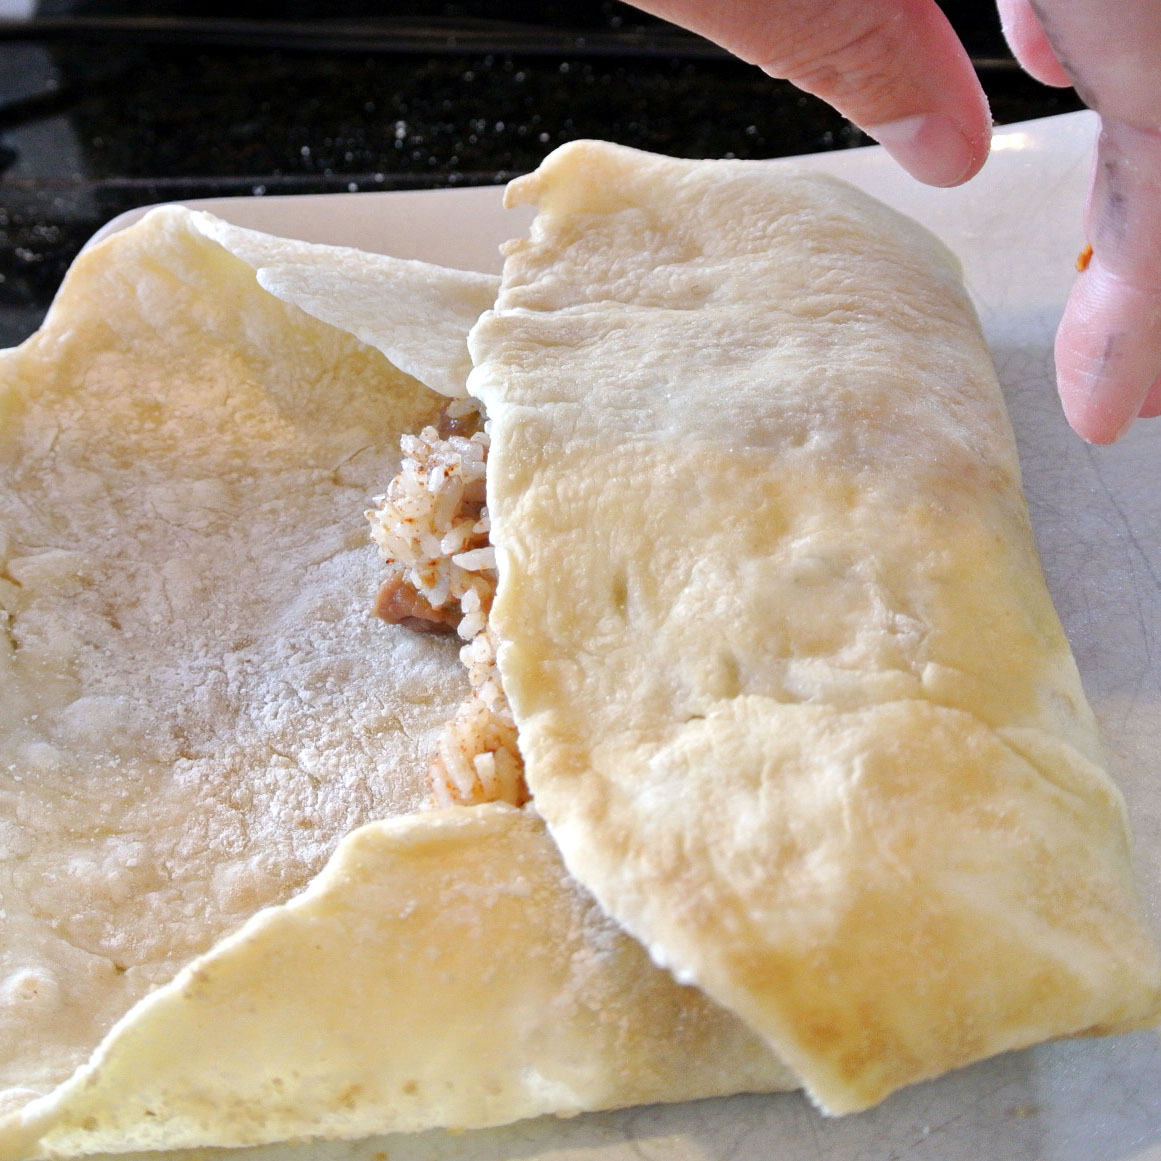 Mom, What's For Dinner?: Hot Hand Rolled Gluten Free Burritos